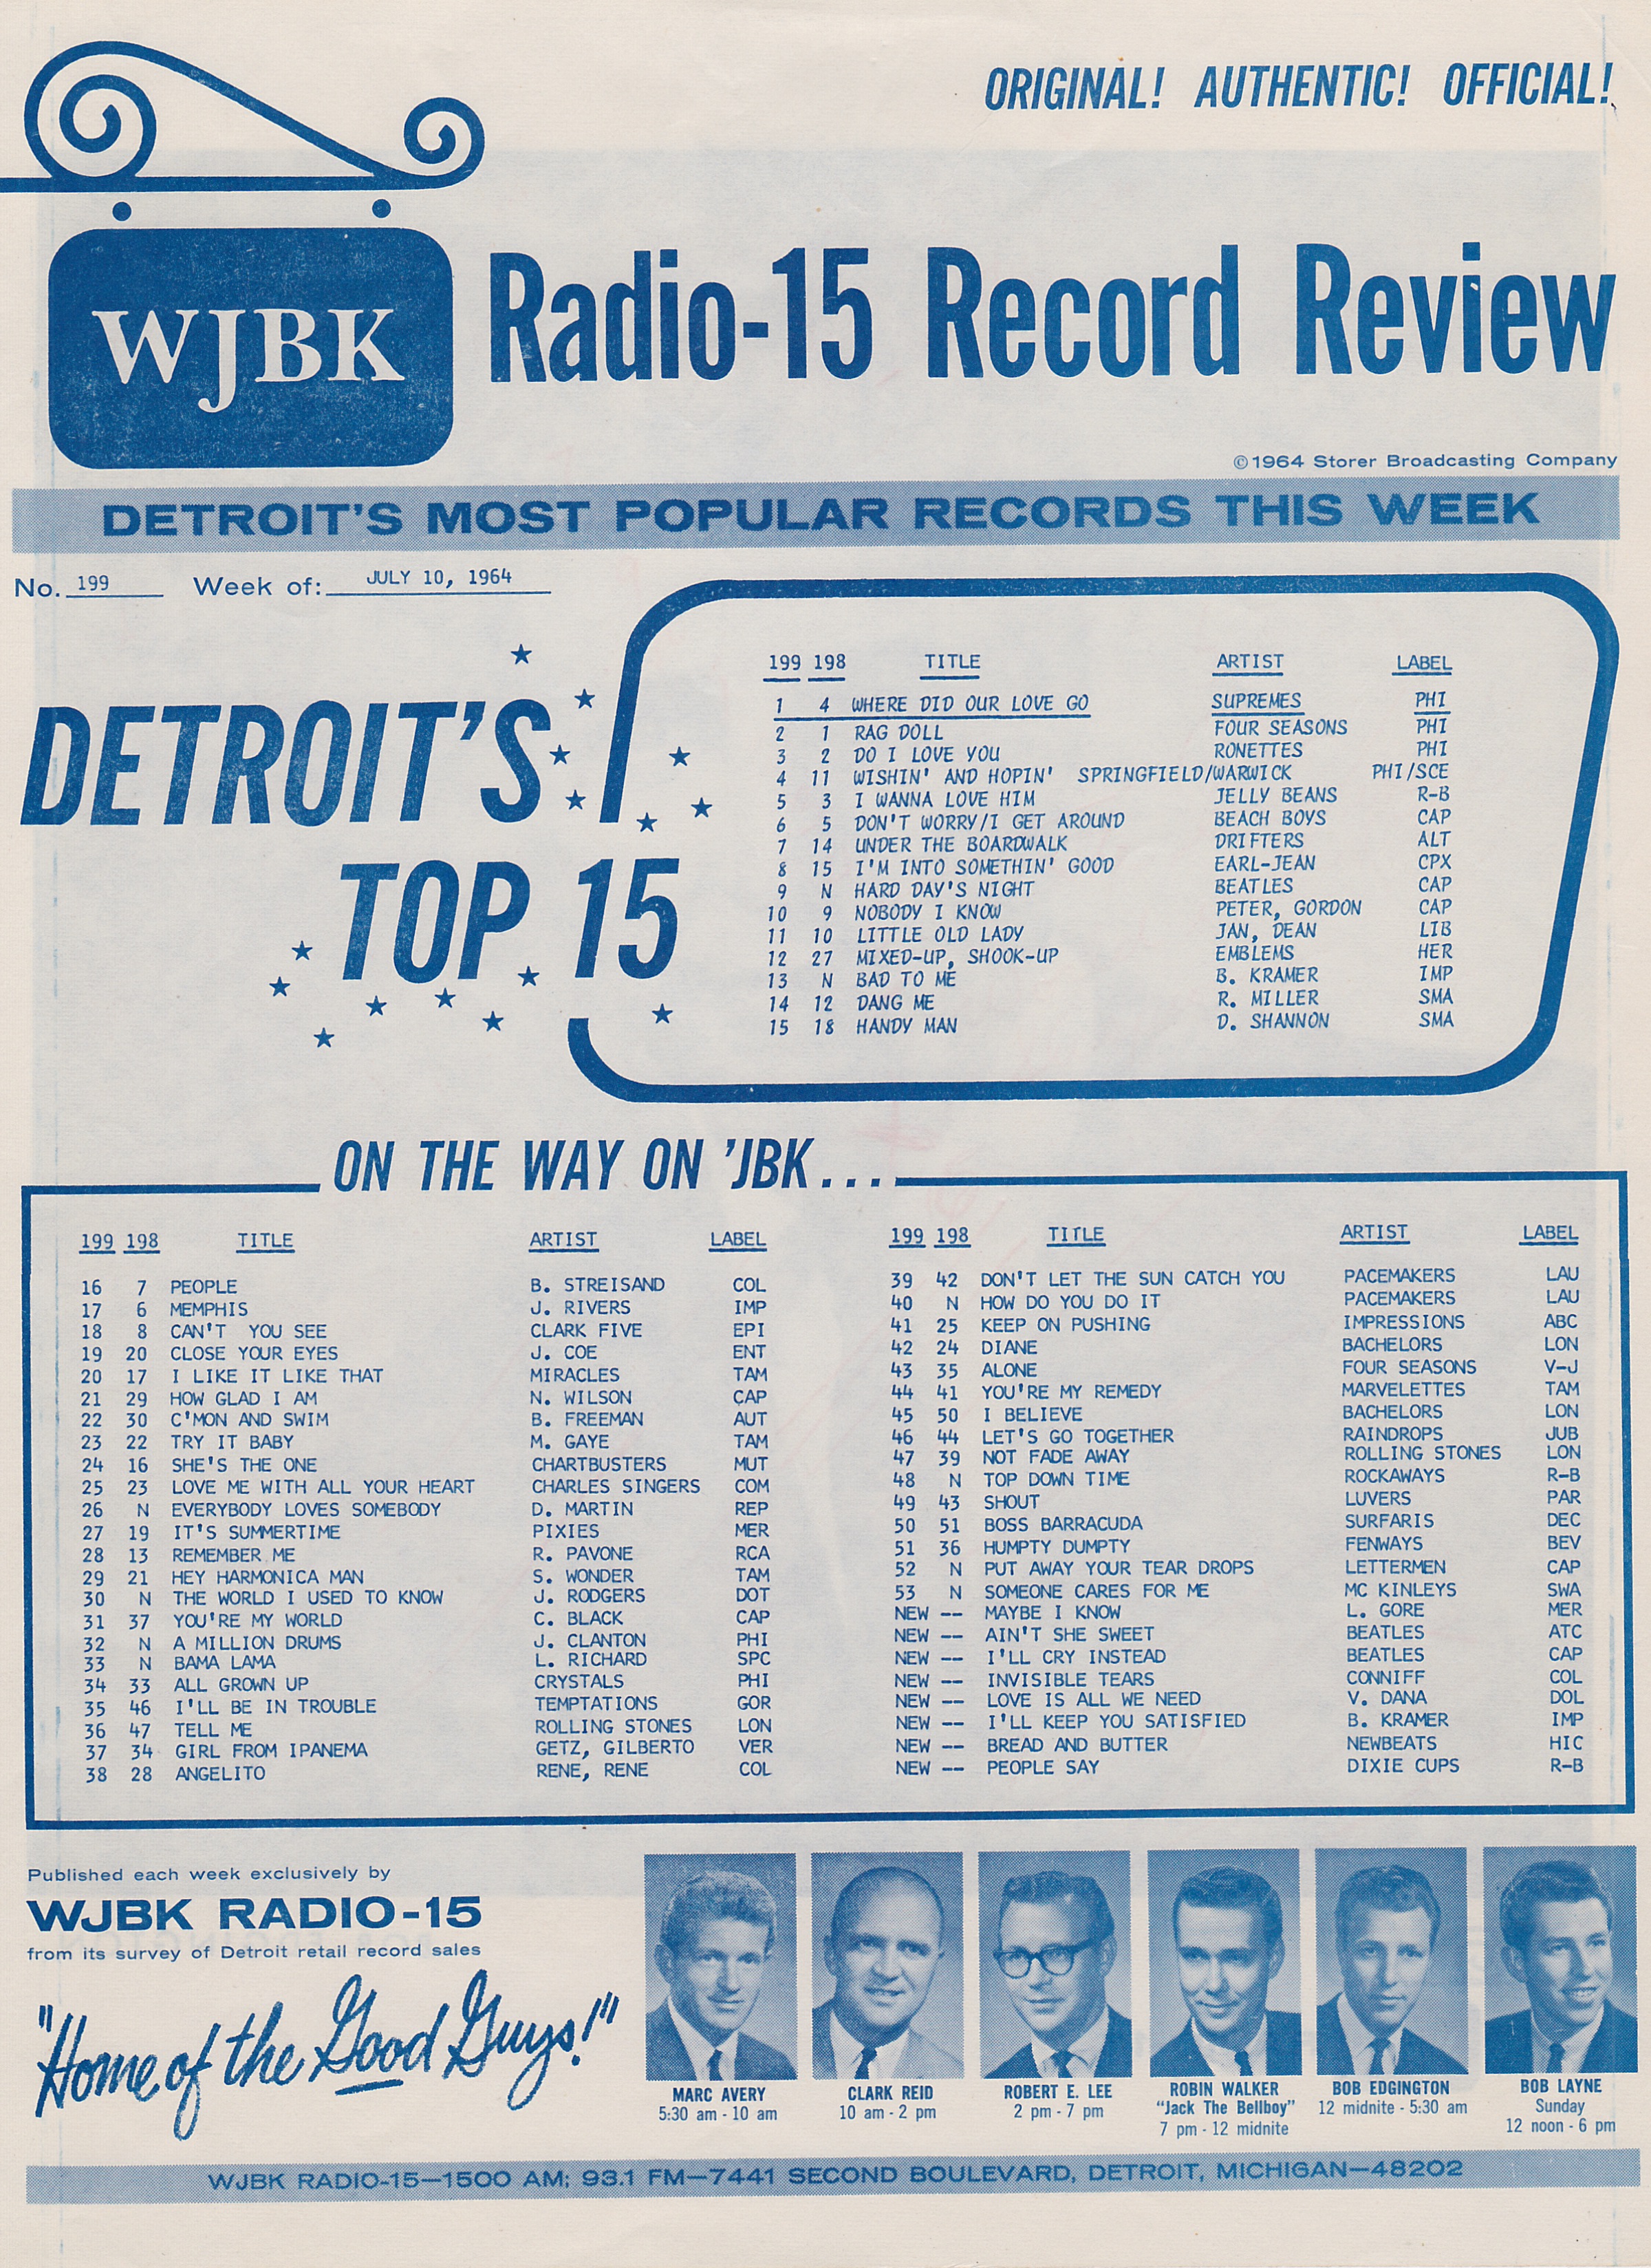 WJBK - JULY 10, 1964 - FRONT